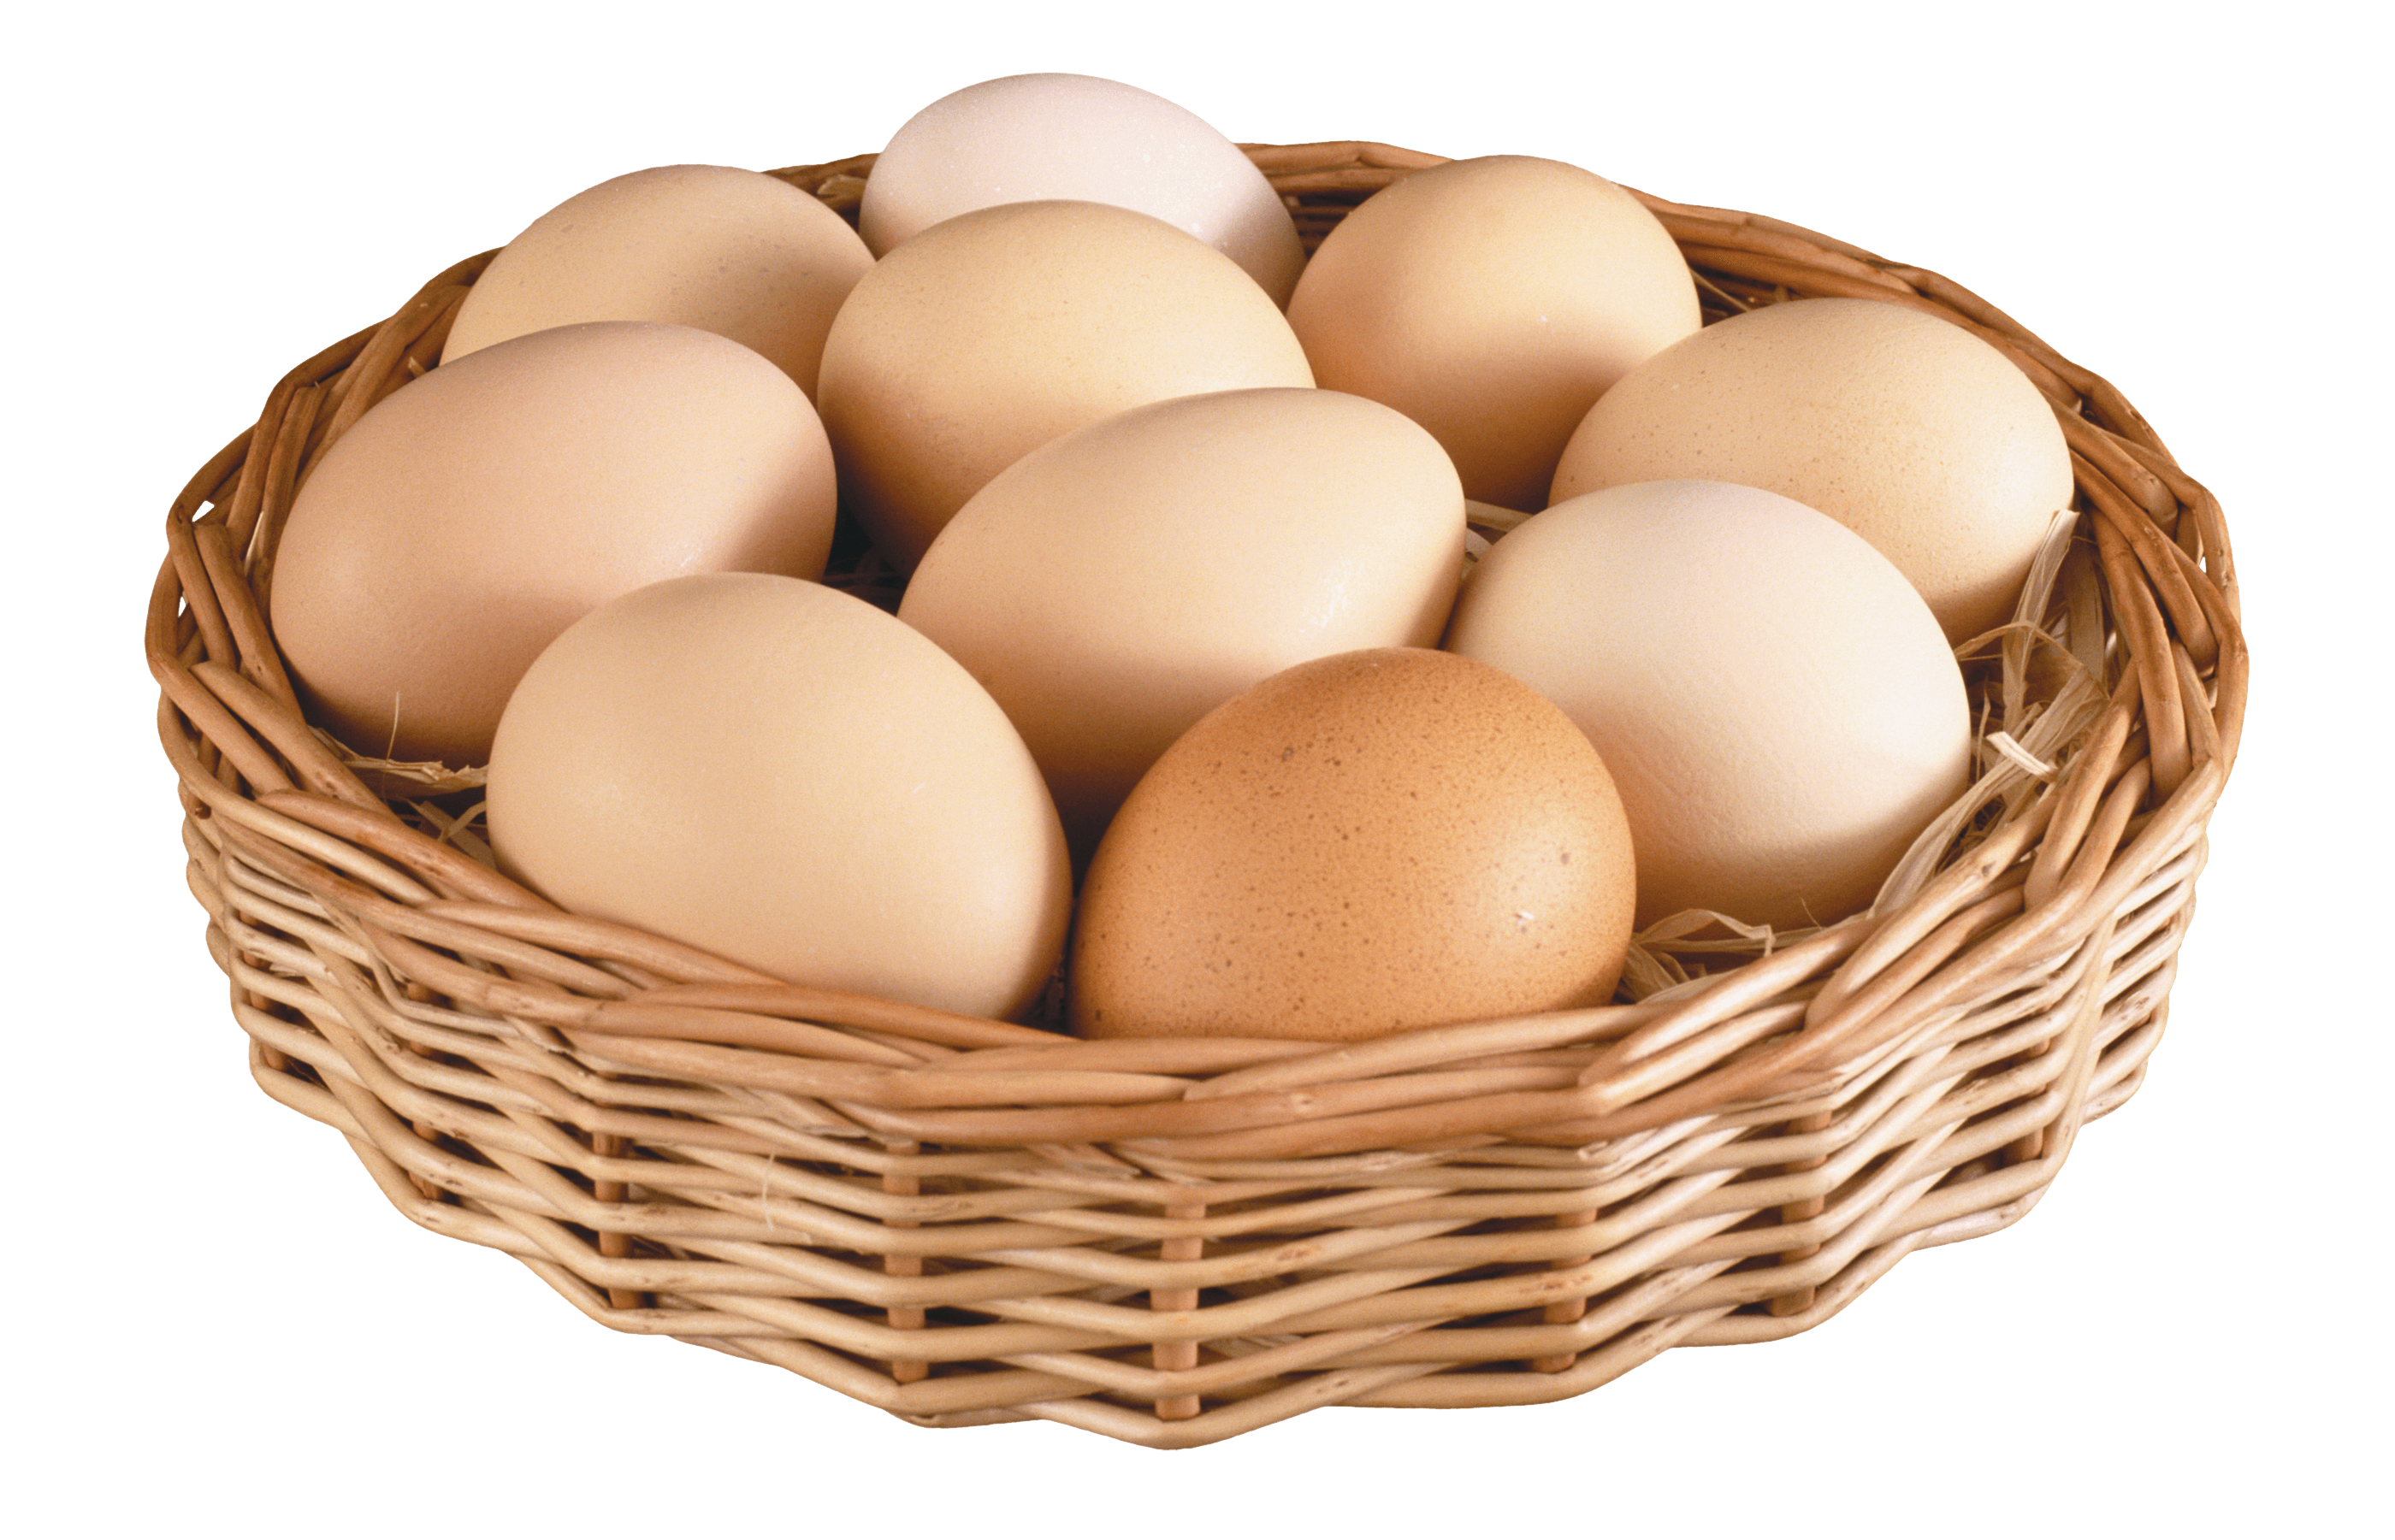 Png image purepng free. Eggs clipart egg whites